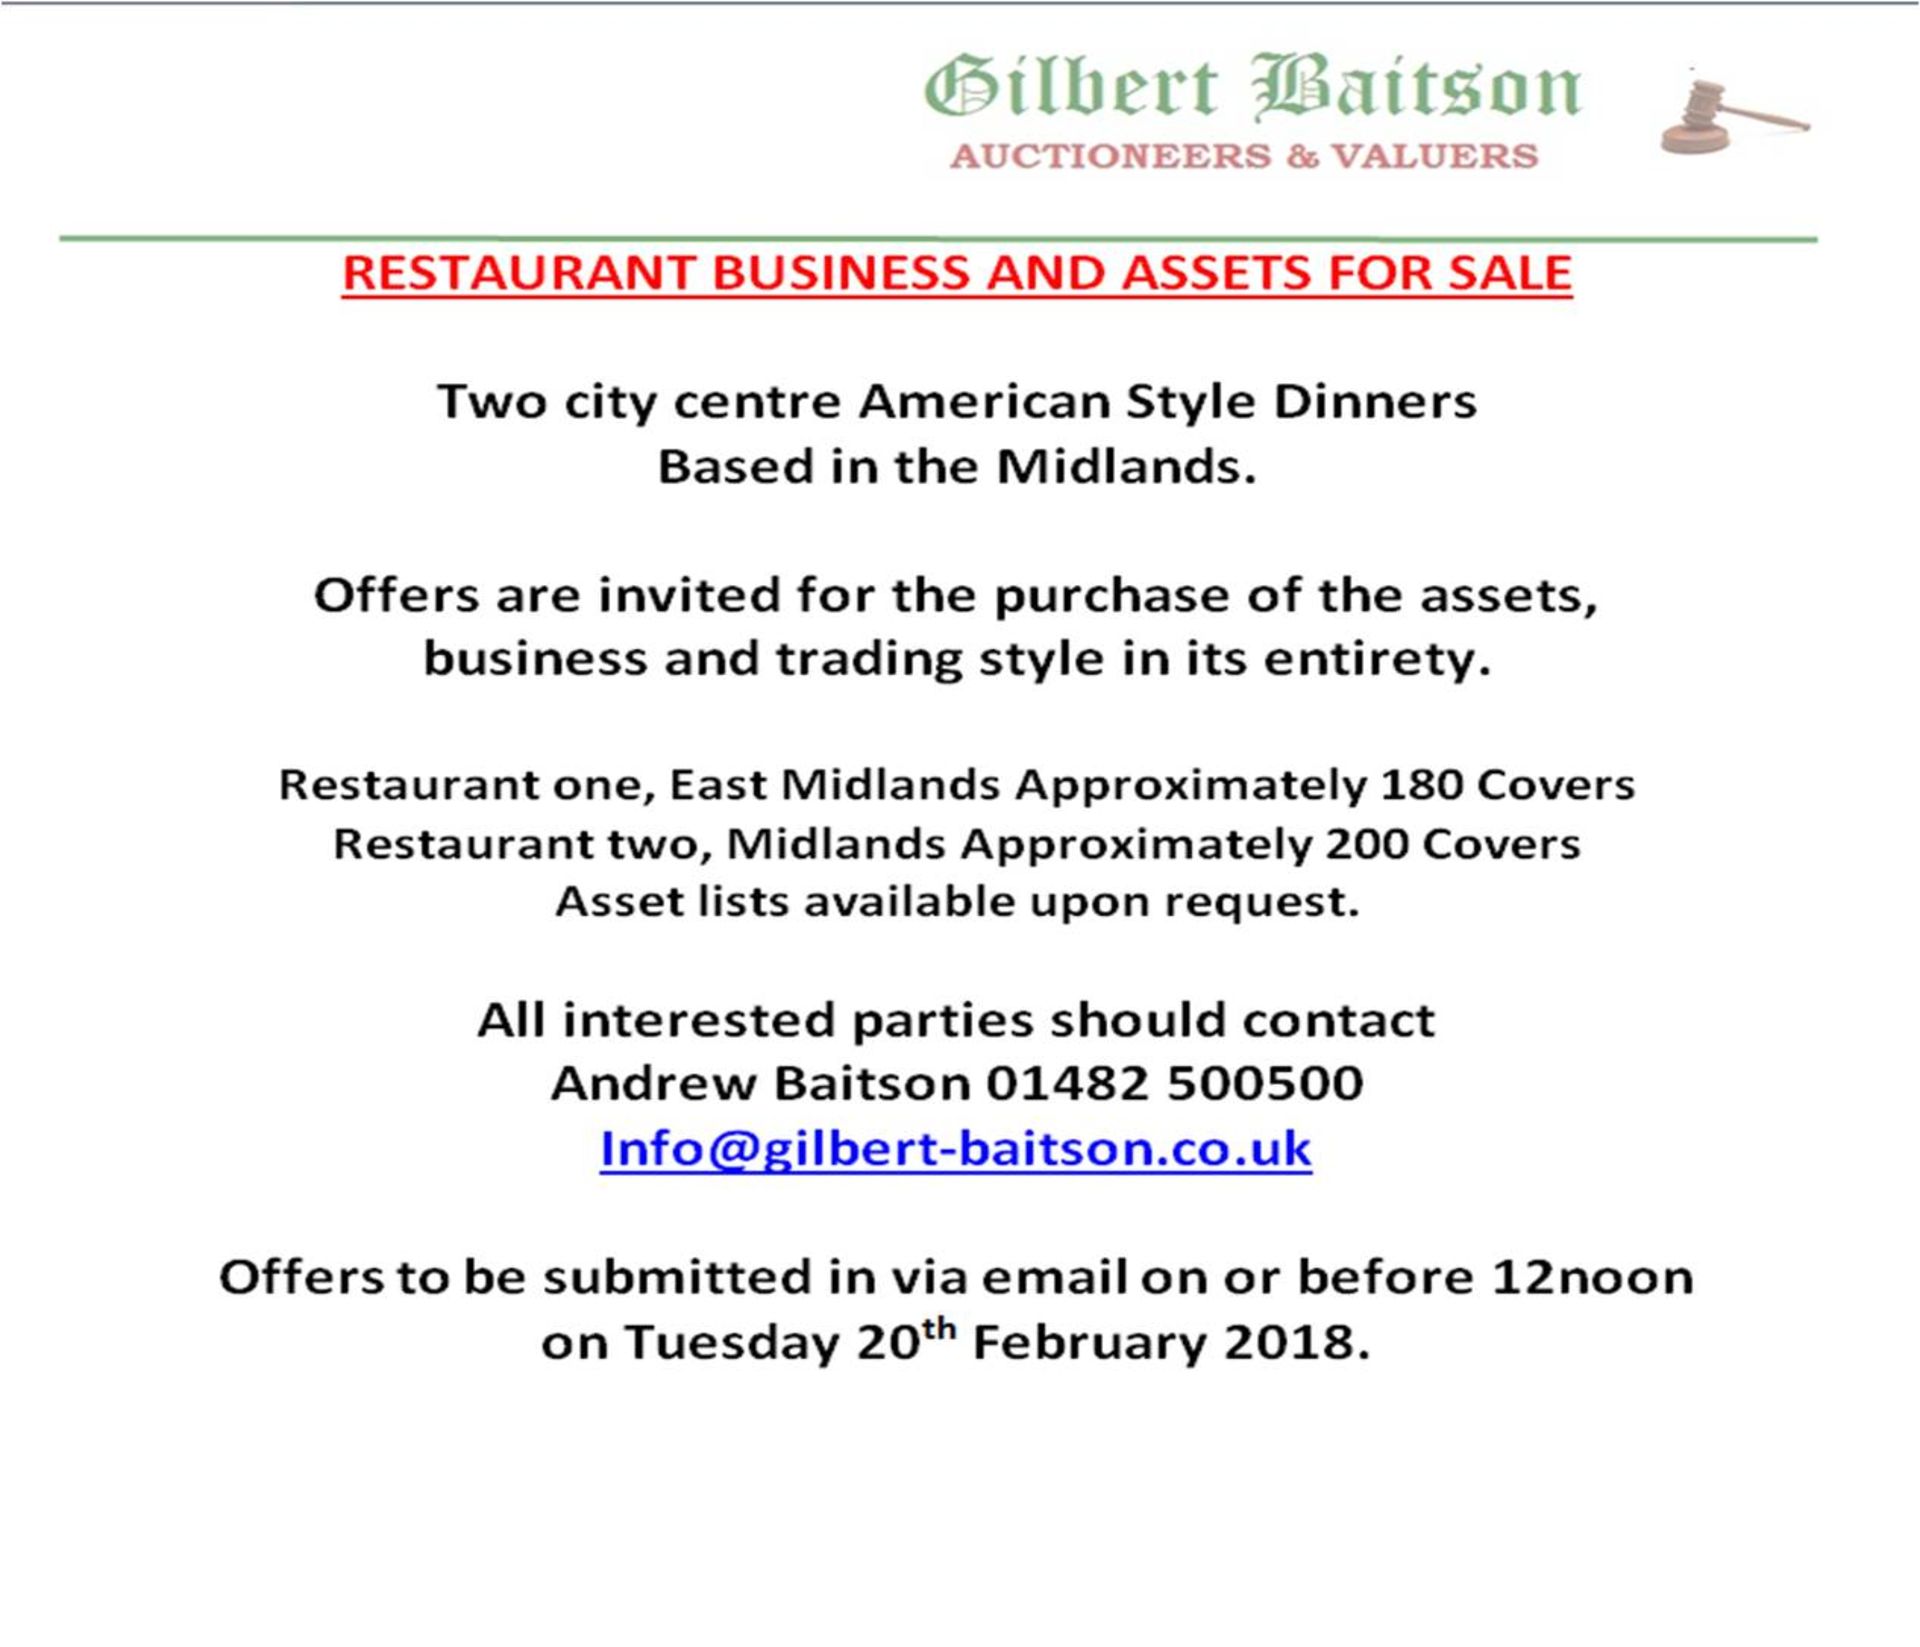 PLEASE DO NOT BID ON THIS LOT - ANY INTERESTING PARTIES PLEASE CONTACT ANDREW BAITSON on 01482 500